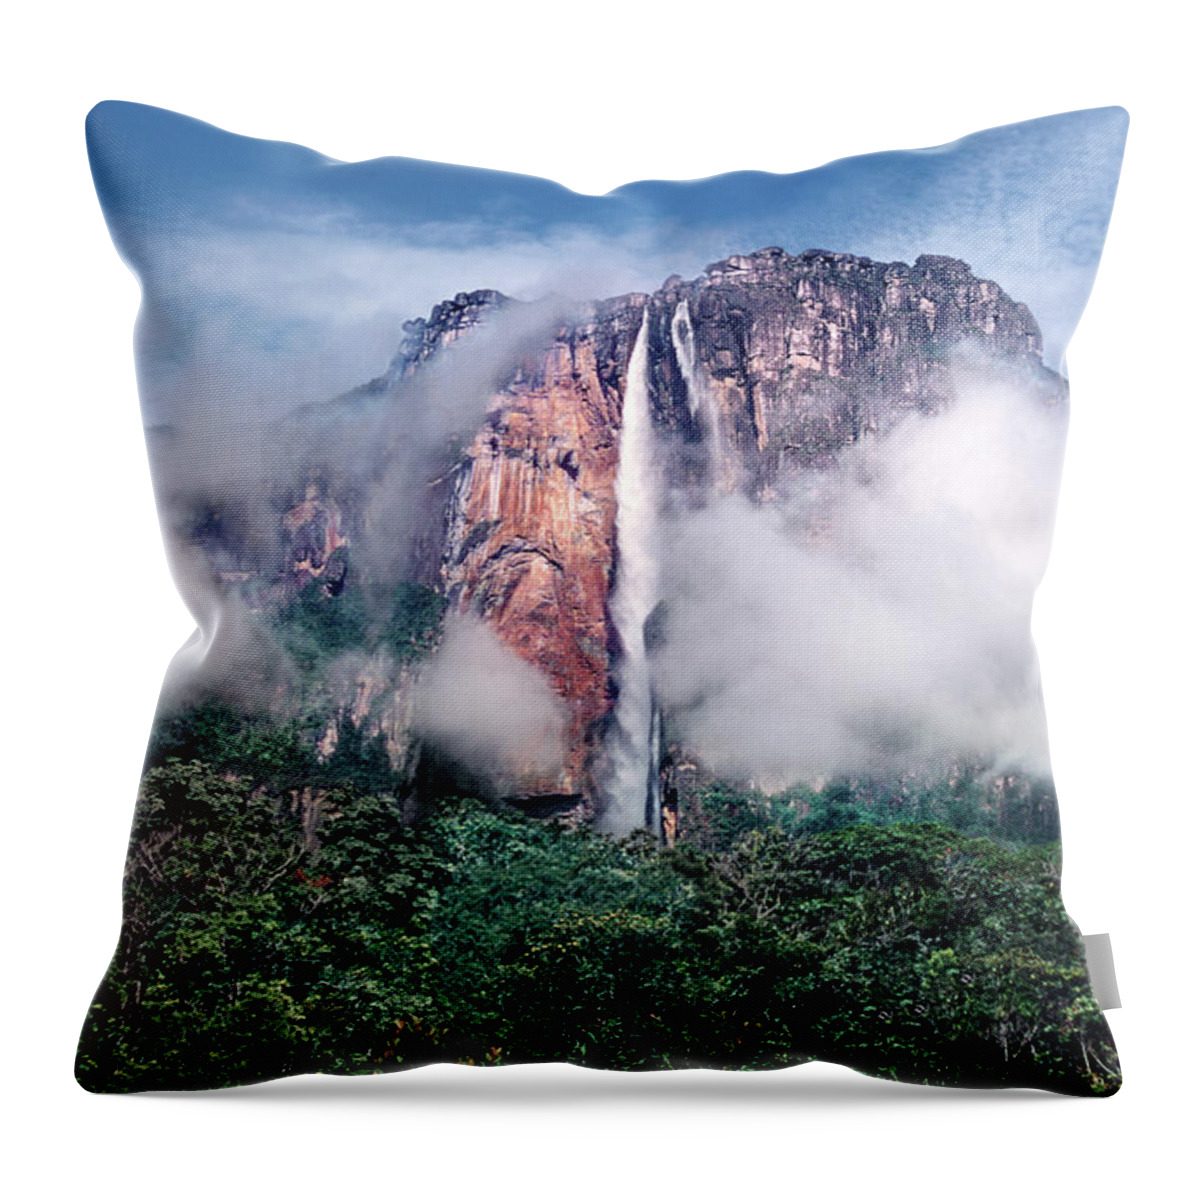 Dave Welling Throw Pillow featuring the photograph Angel Falls In Mist Canaima National Park Venezuela by Dave Welling